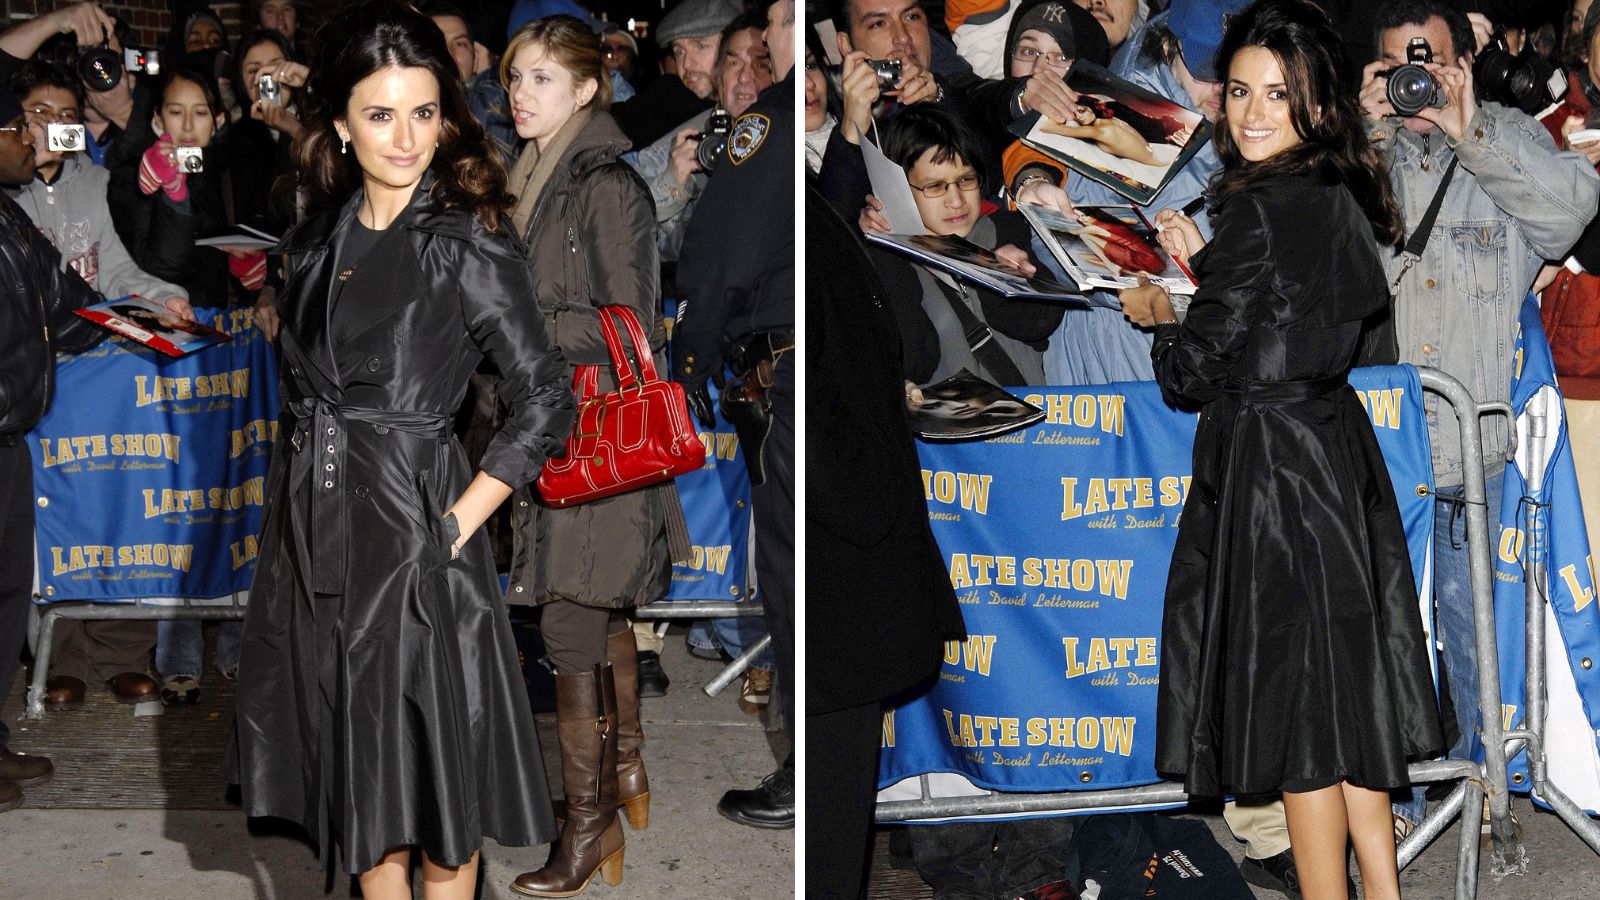 Penelope Cruz, in a Michael Kors trenchcoat, at talk show appearance for The Late Show with David Letterman, Ed Sullivan Theater, New York, January 09, 2007